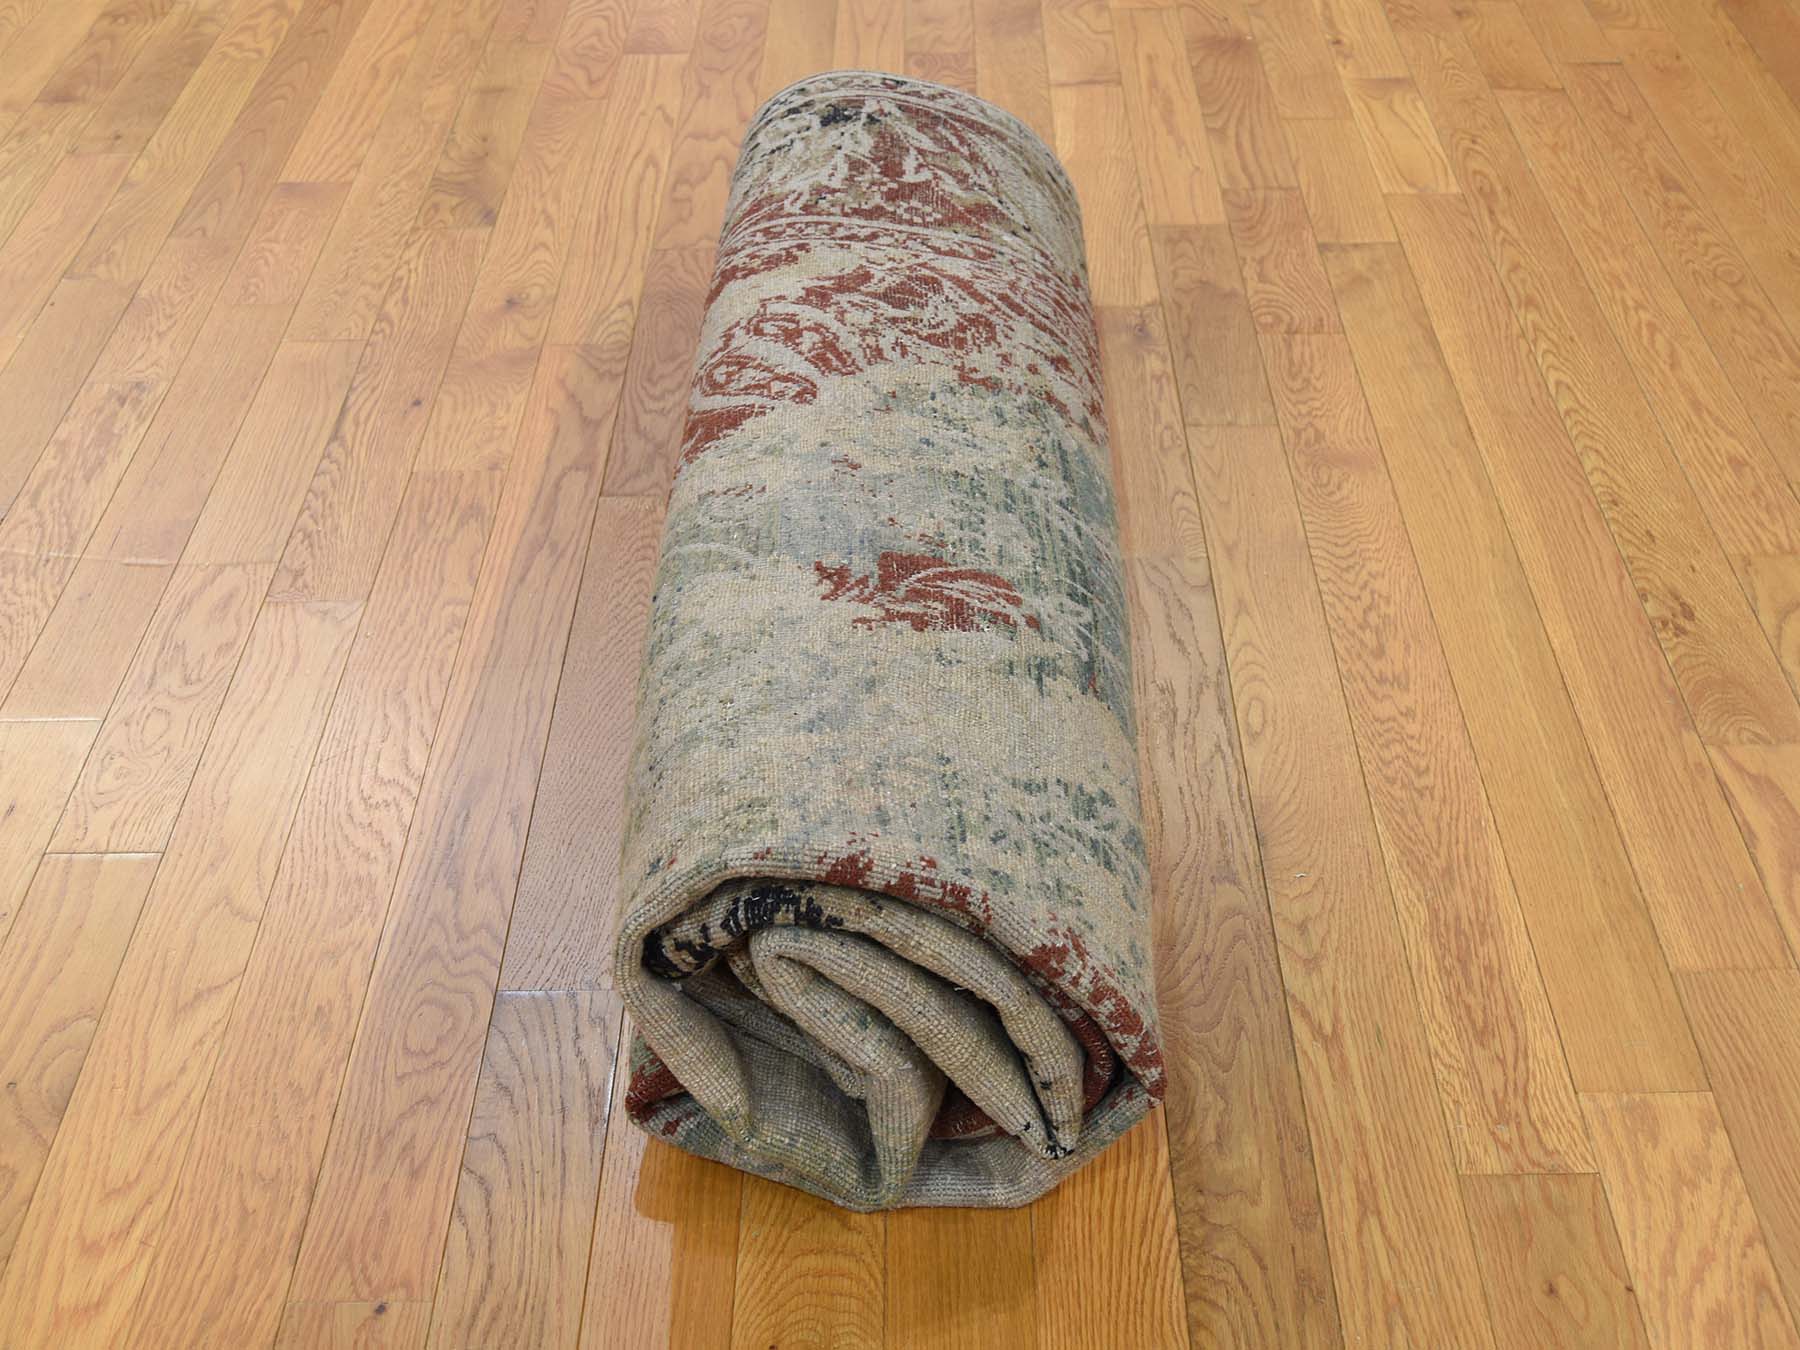 TransitionalRugs ORC348624